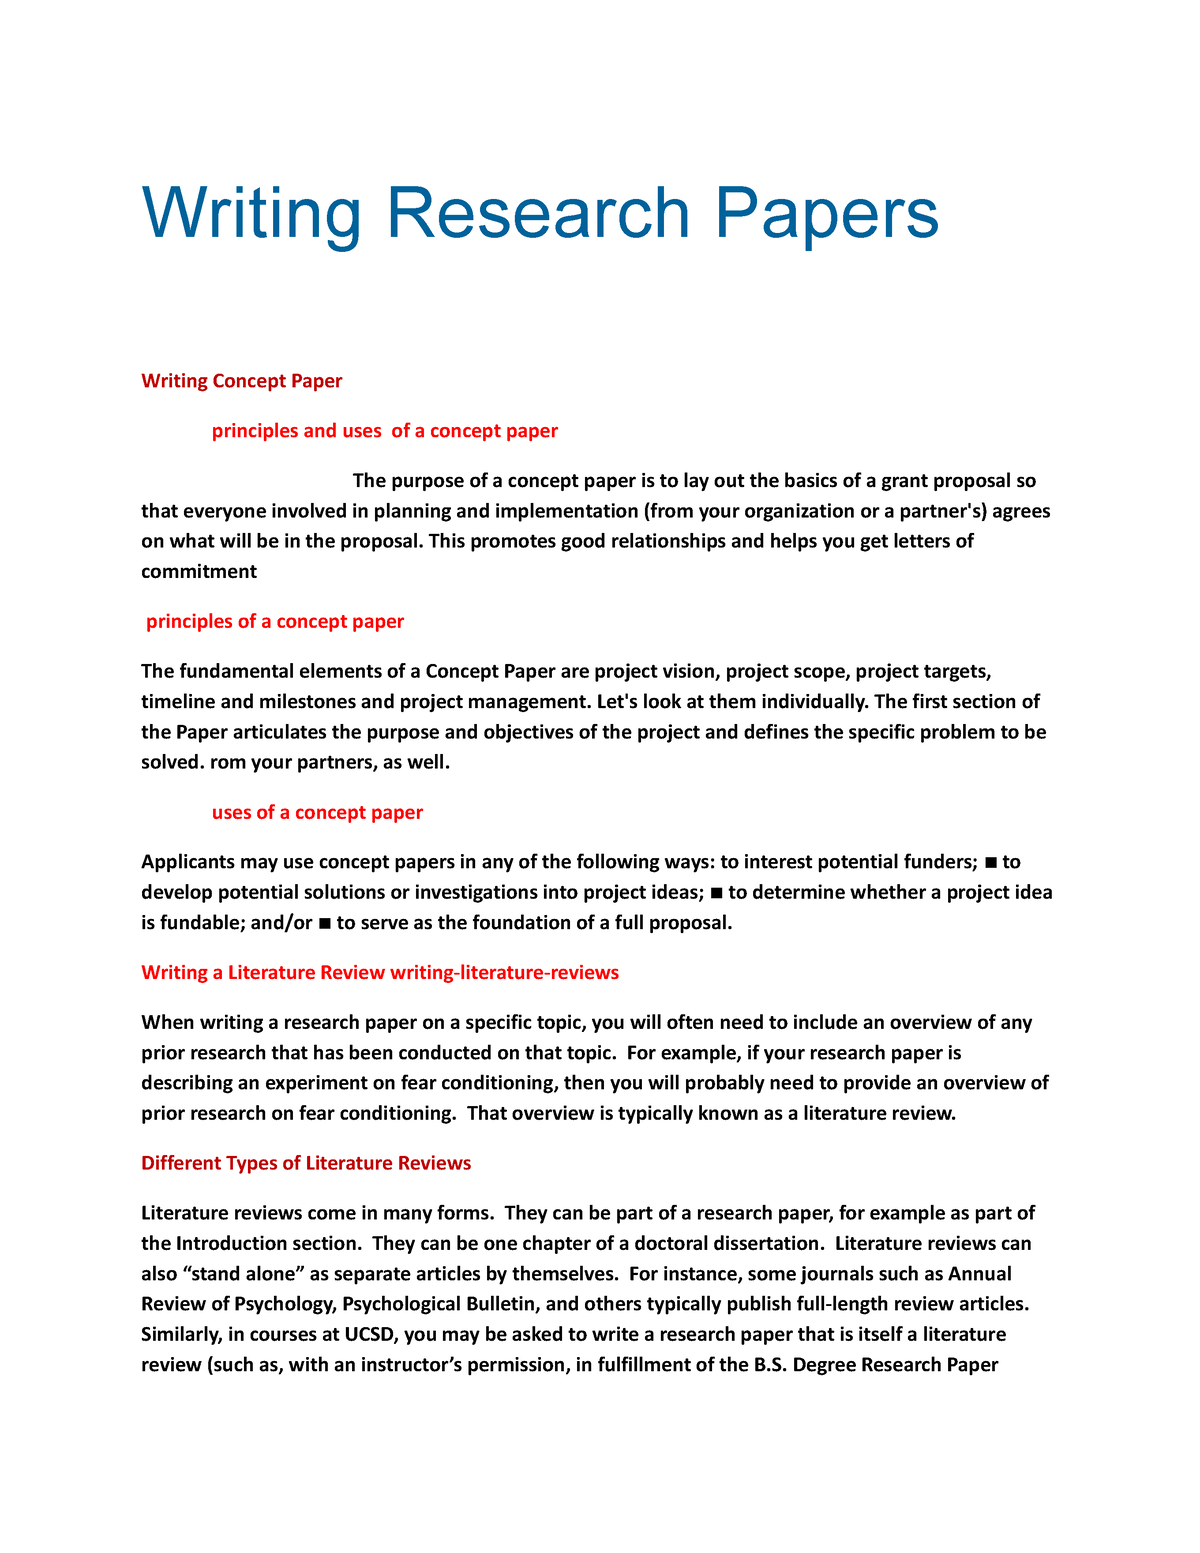 which part of the research concept paper you find most challenging